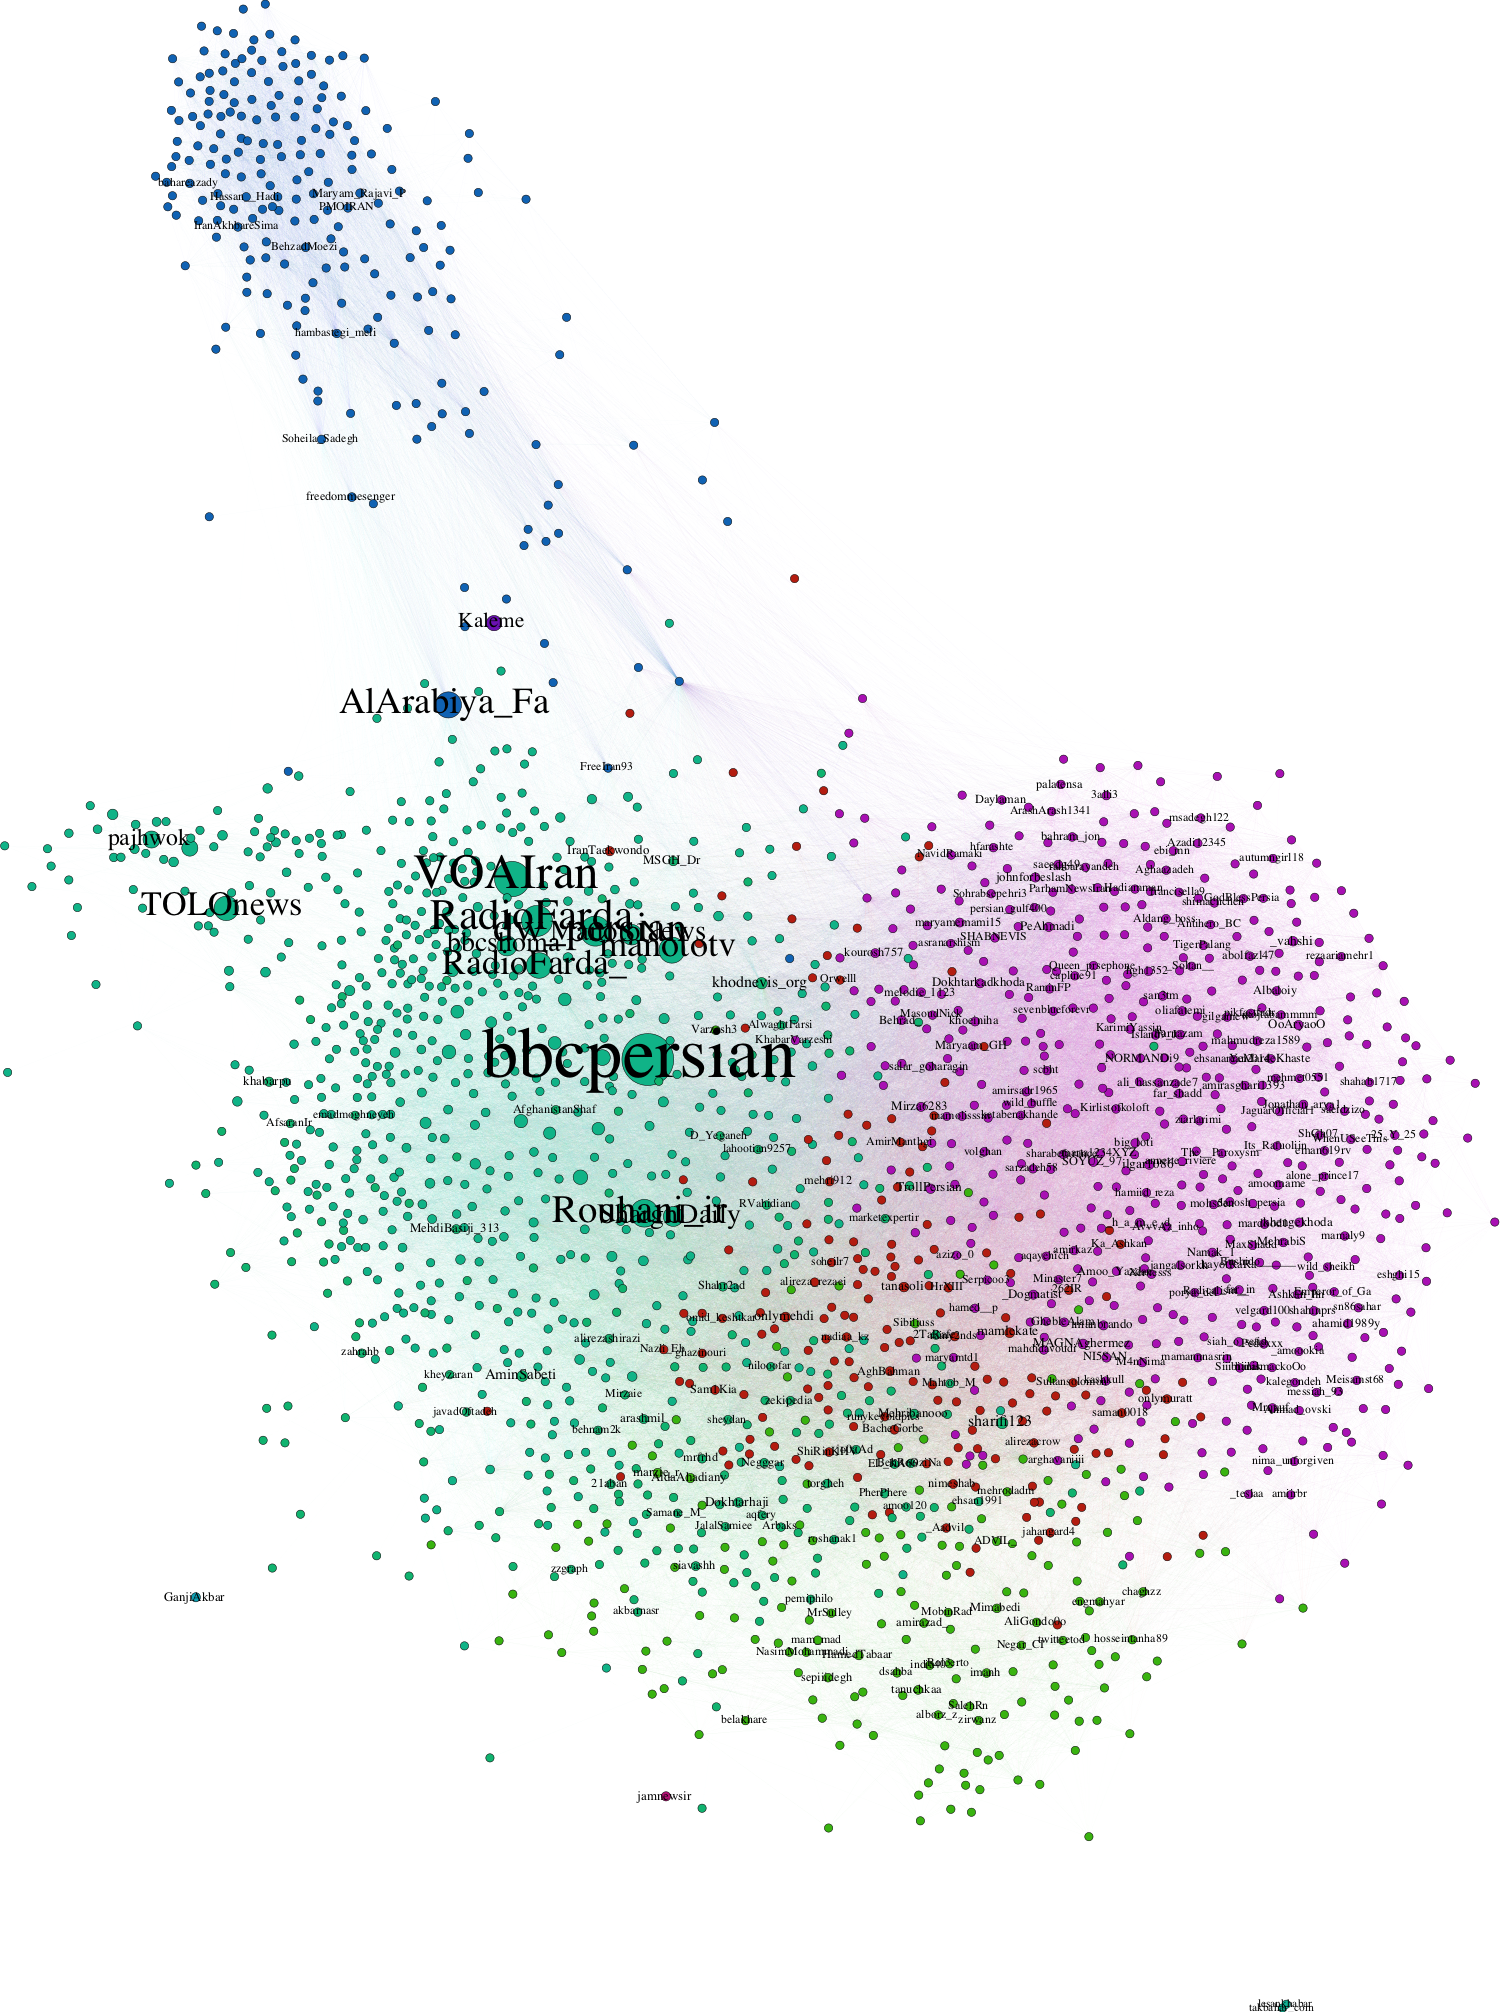 Network of Twitter user accounts